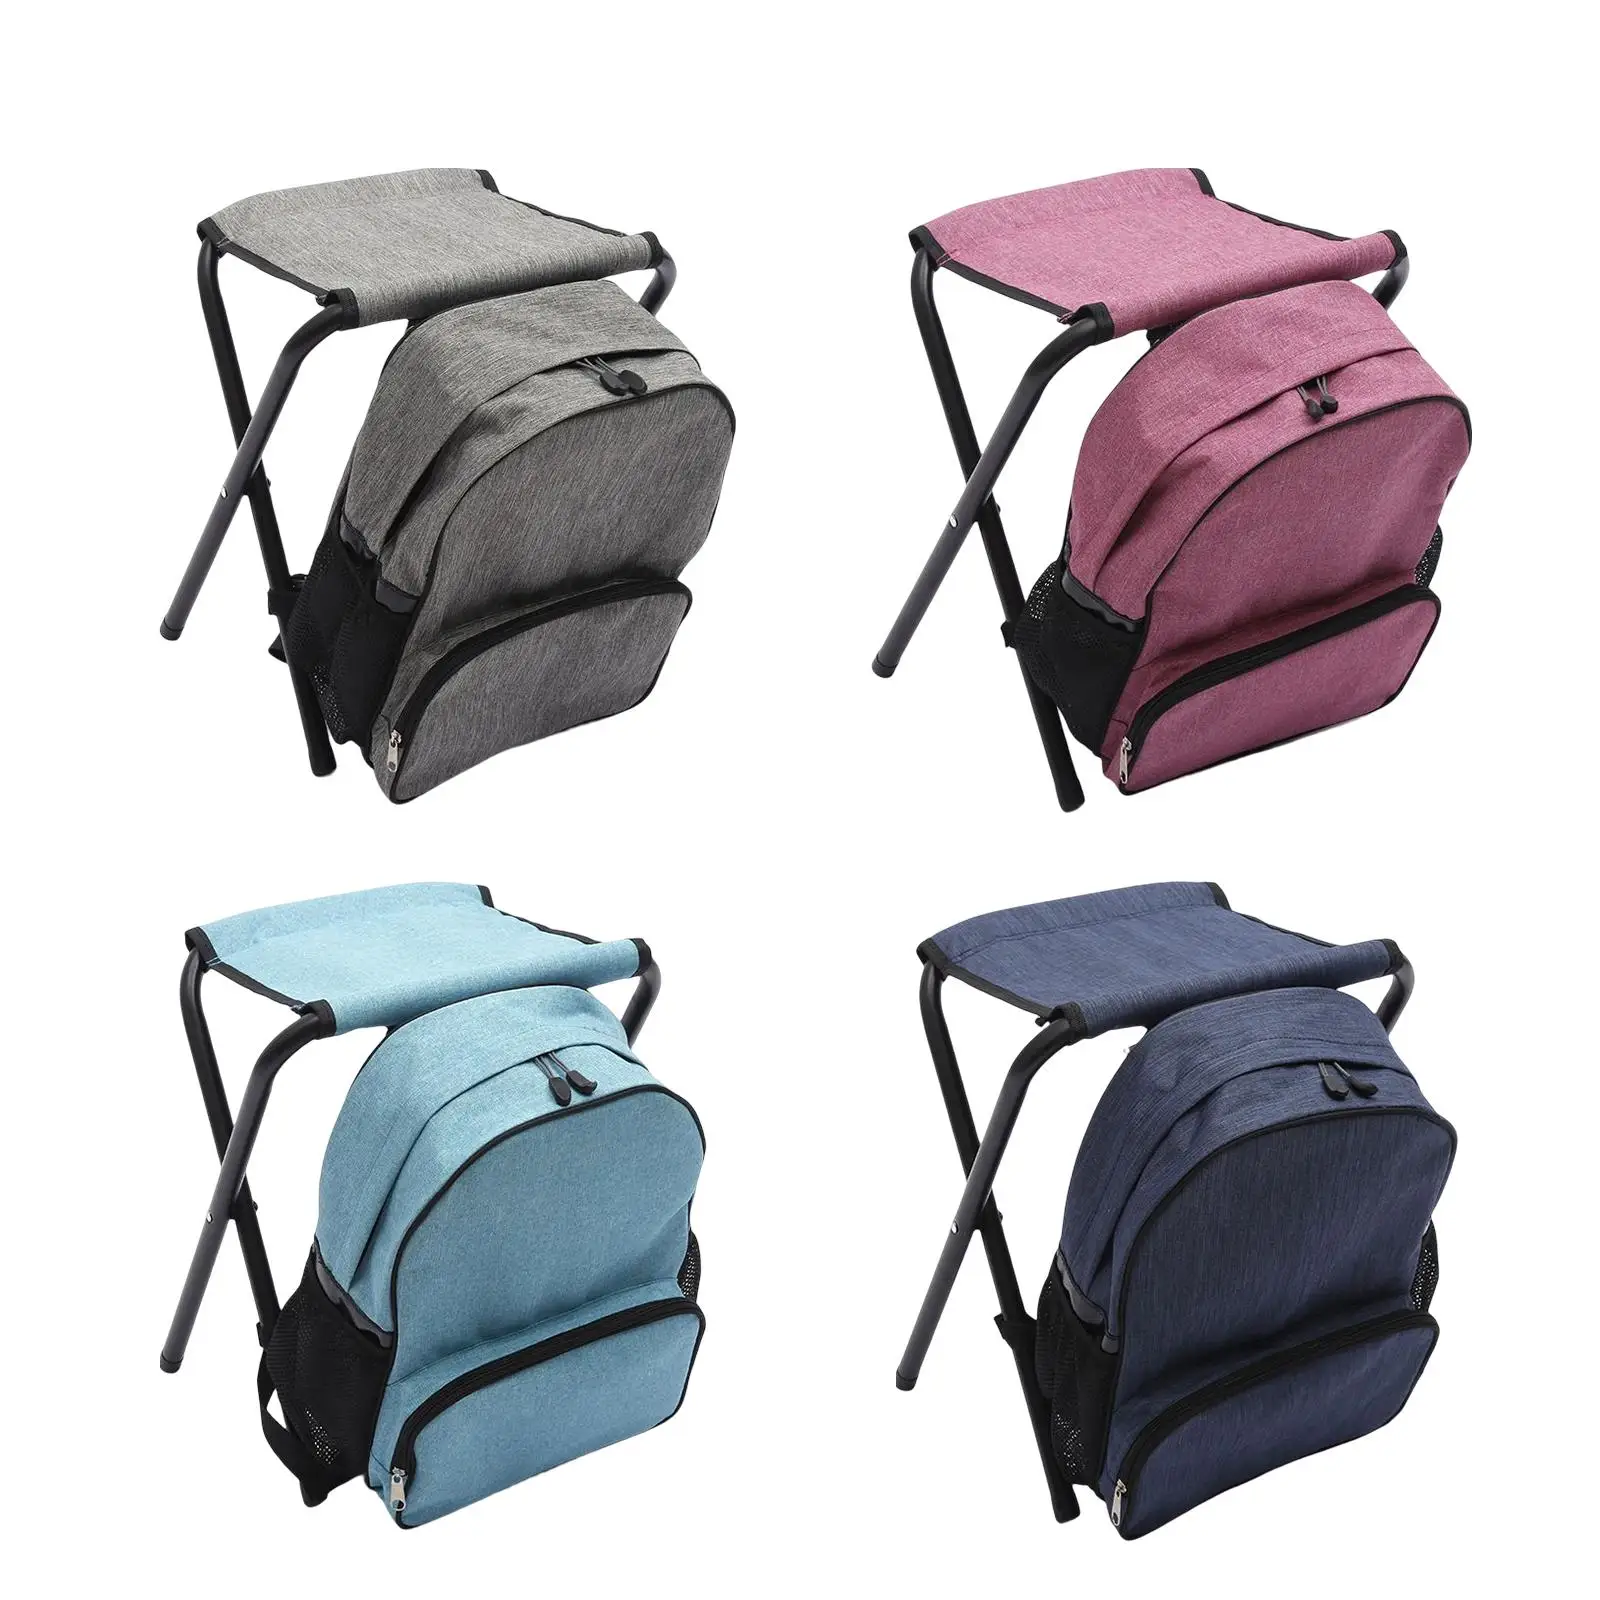 Fishing Seat Compact Chair Foldable Stool with Bag for Fishing Beach Travel